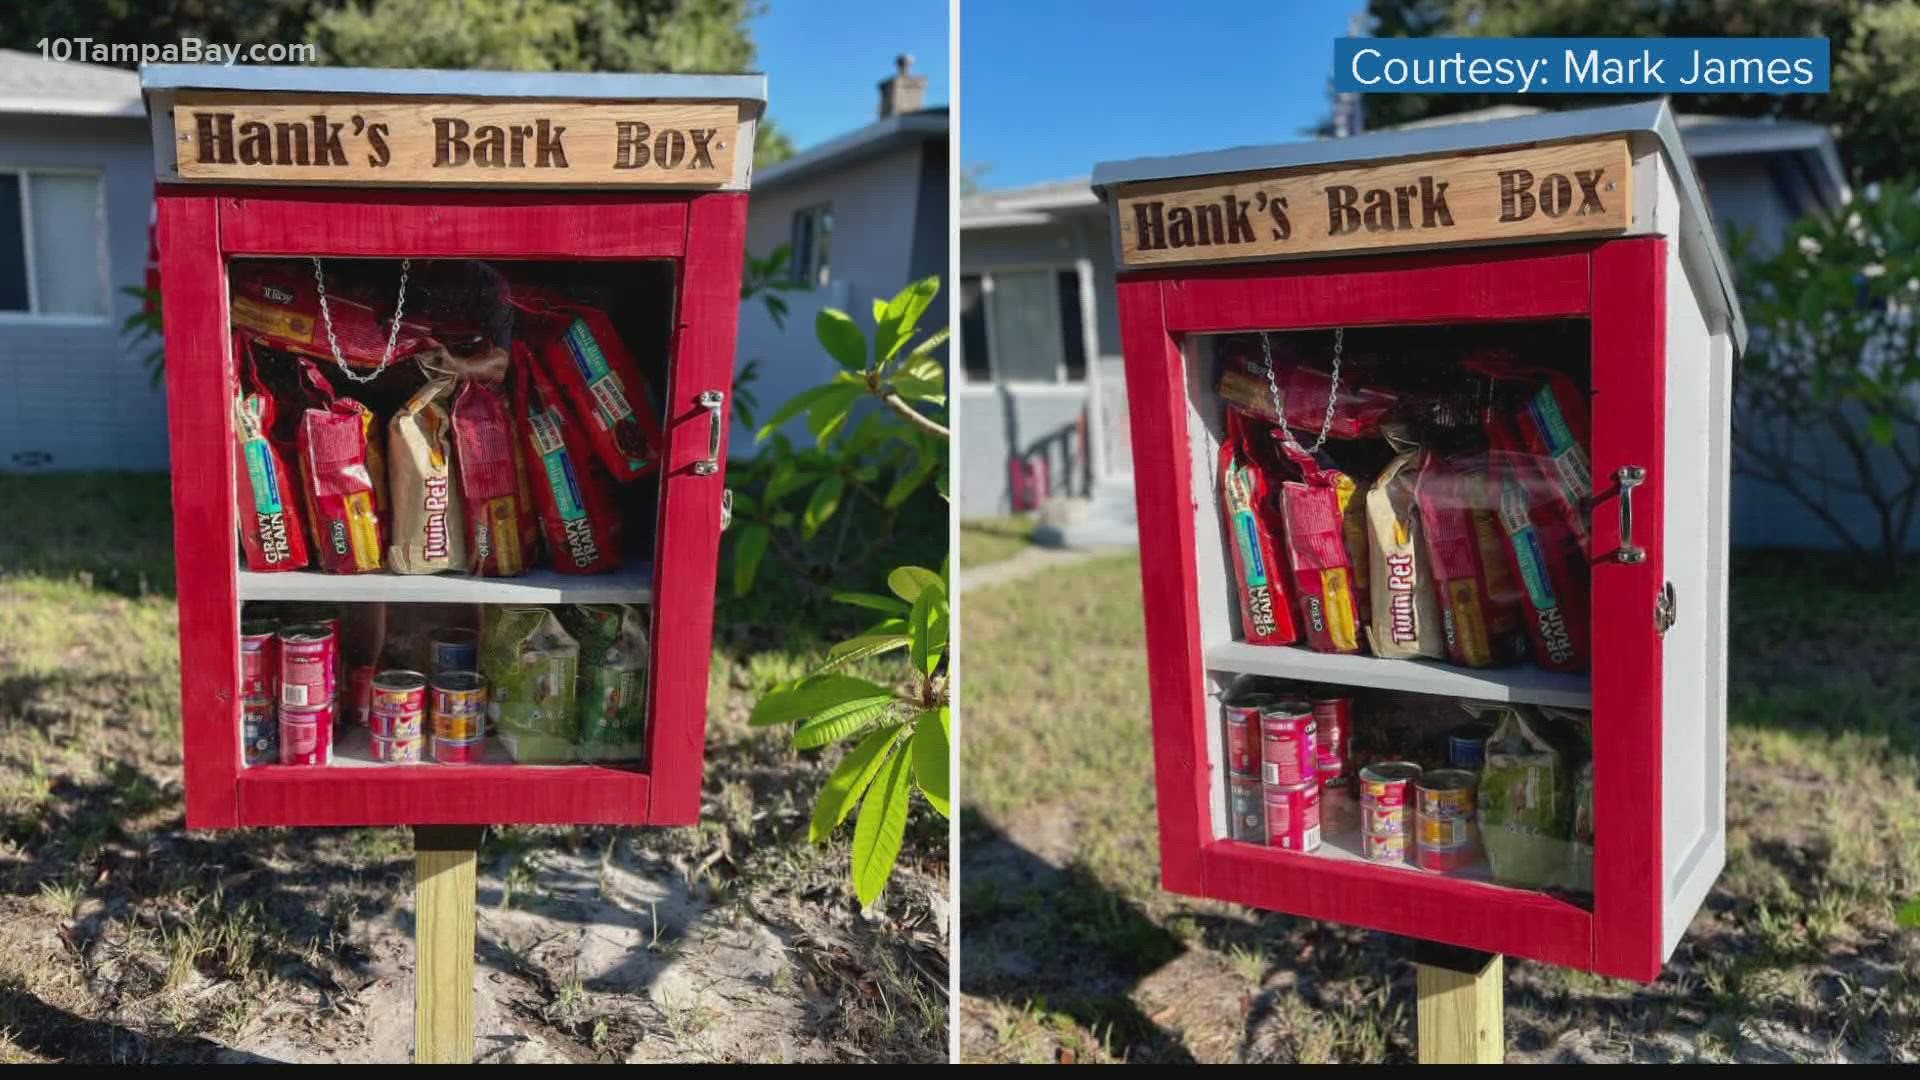 "Hank's Bark Box" is a no-questions-asked free pet pantry where owners who are in need are able to grab and go.